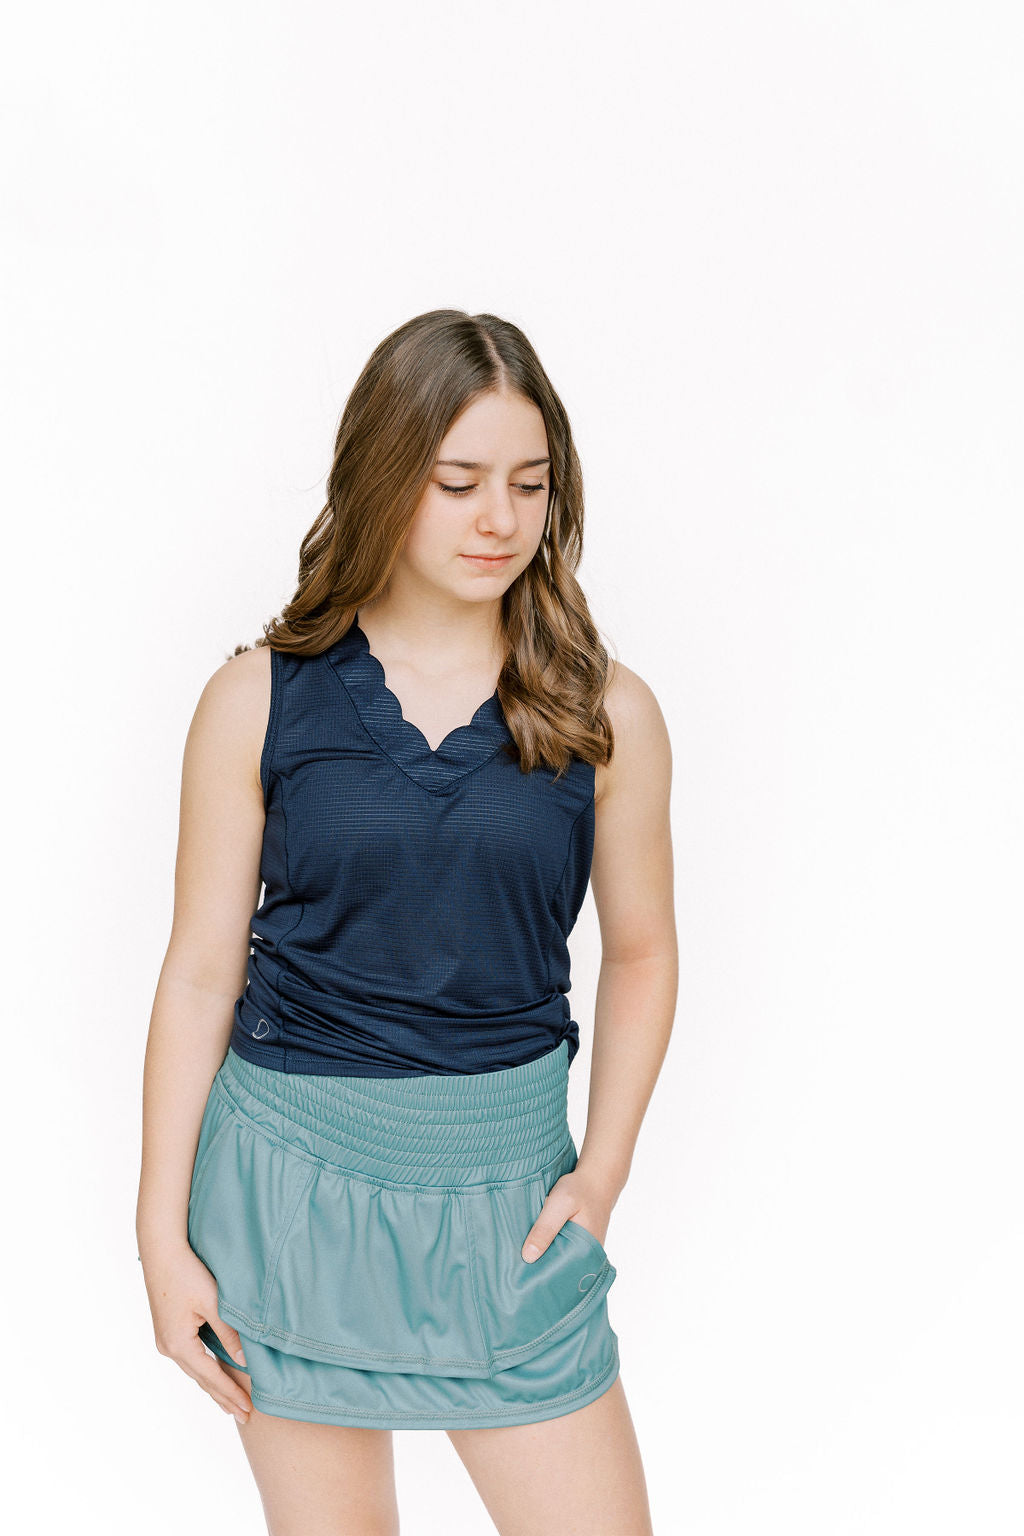 Girls Emily Top Solids